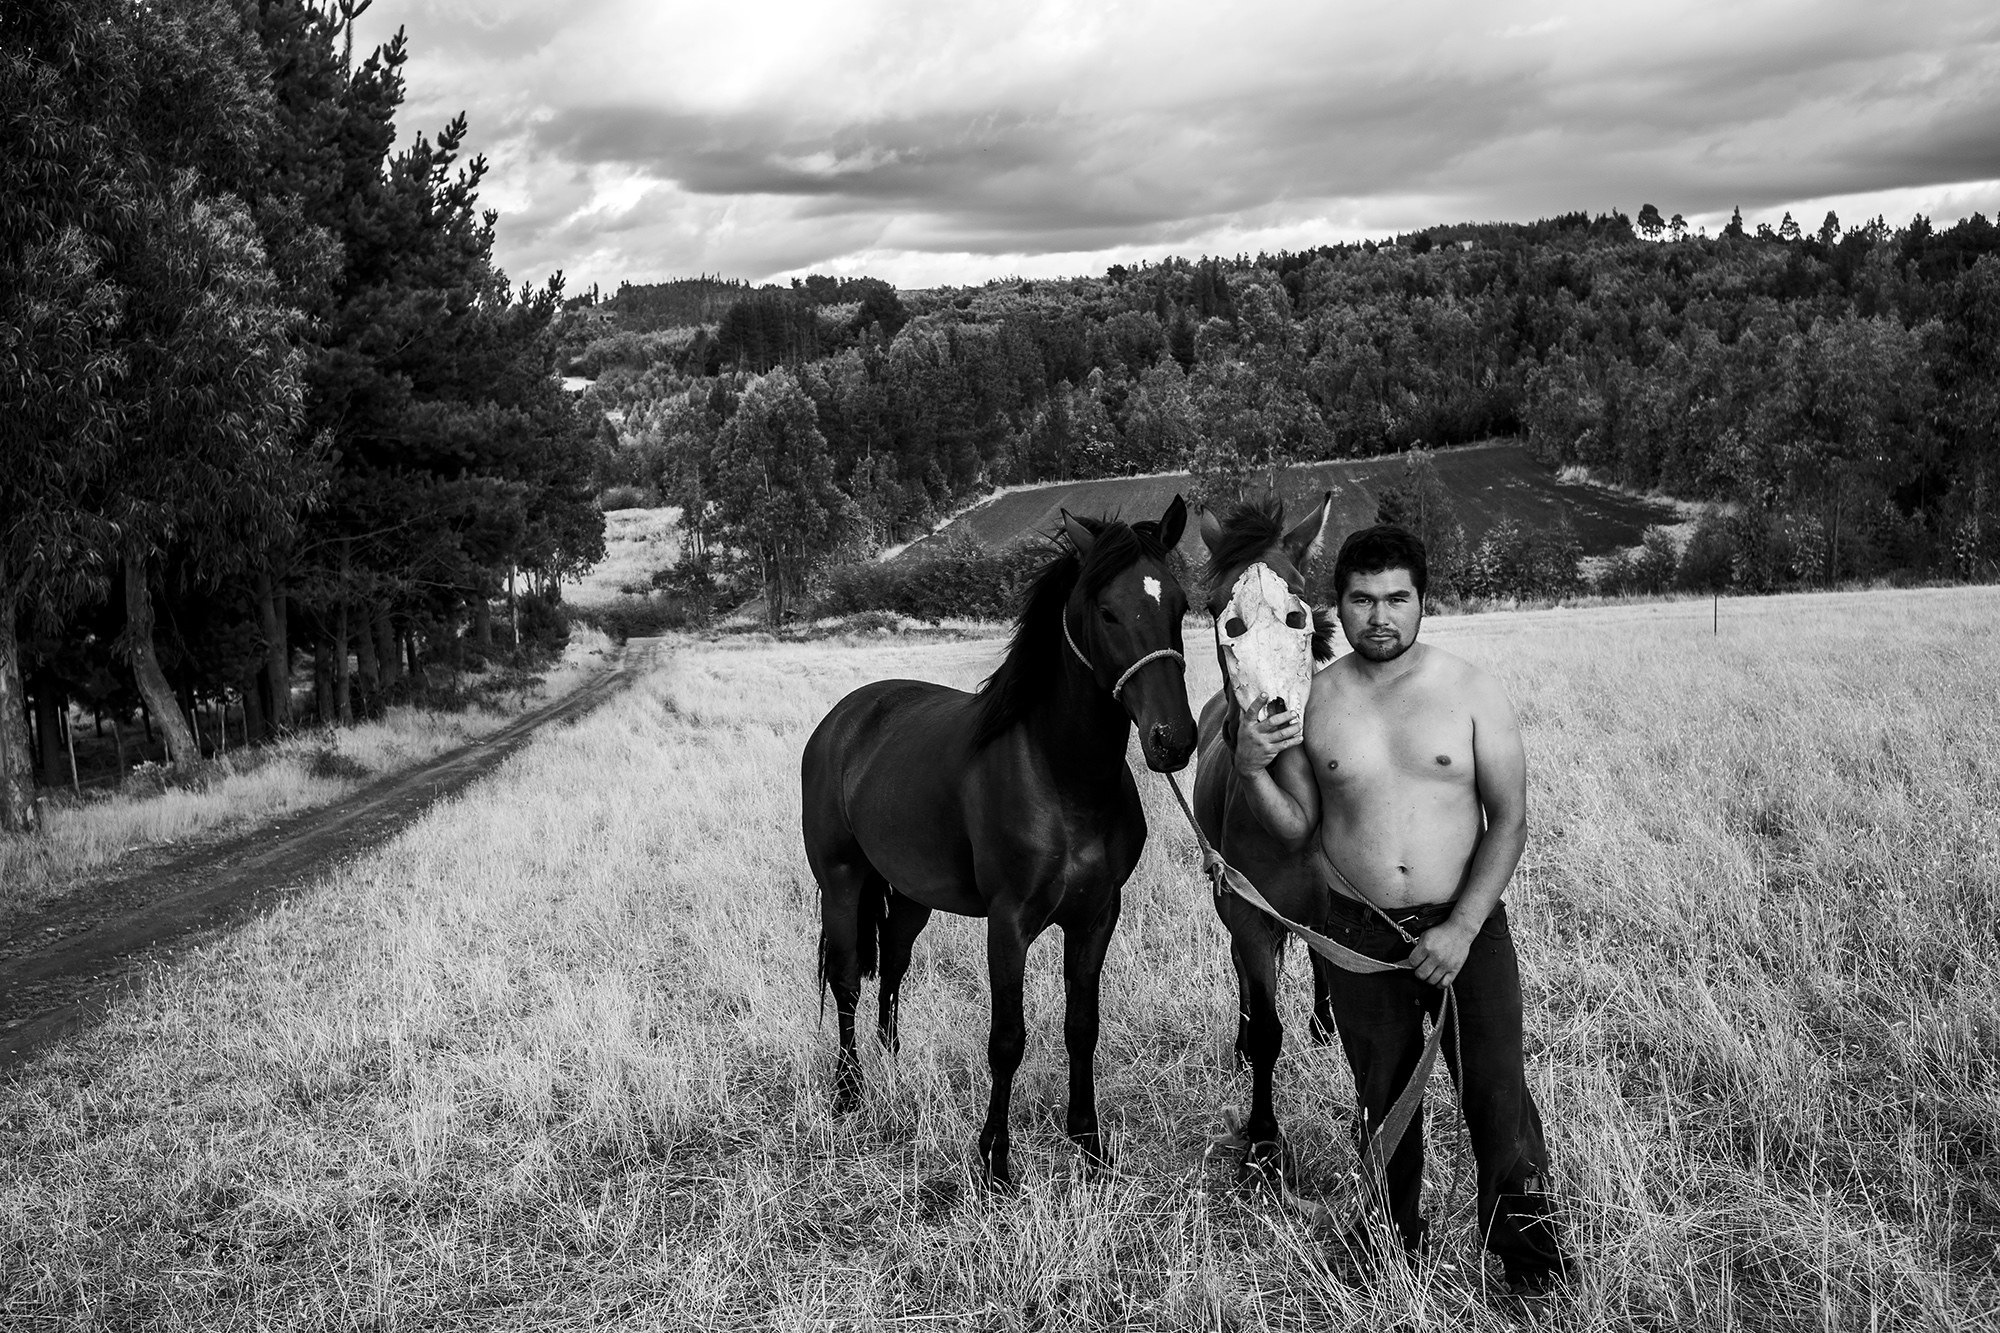 A man stands with two horses in a black-and-white photo